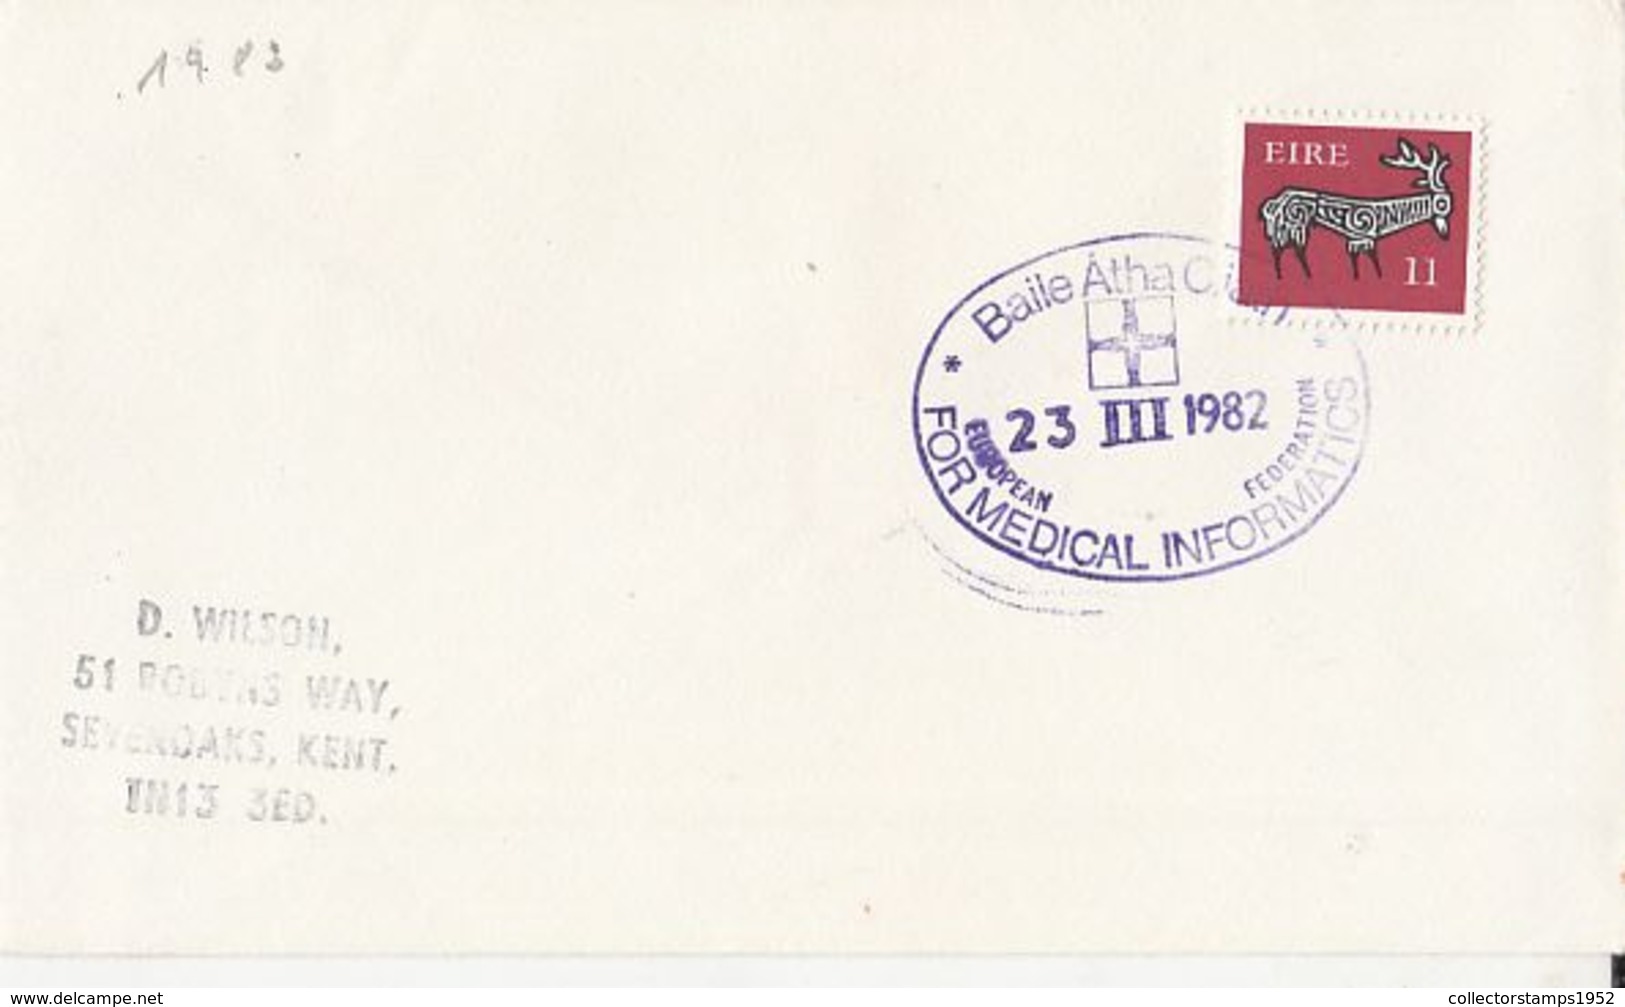 83577- BAILE ATHA CLIATH MEDICAL INFORMATICS SPECIAL POSTMARK ON COVER, DEER STAMP, 1982, IRELAND - Storia Postale